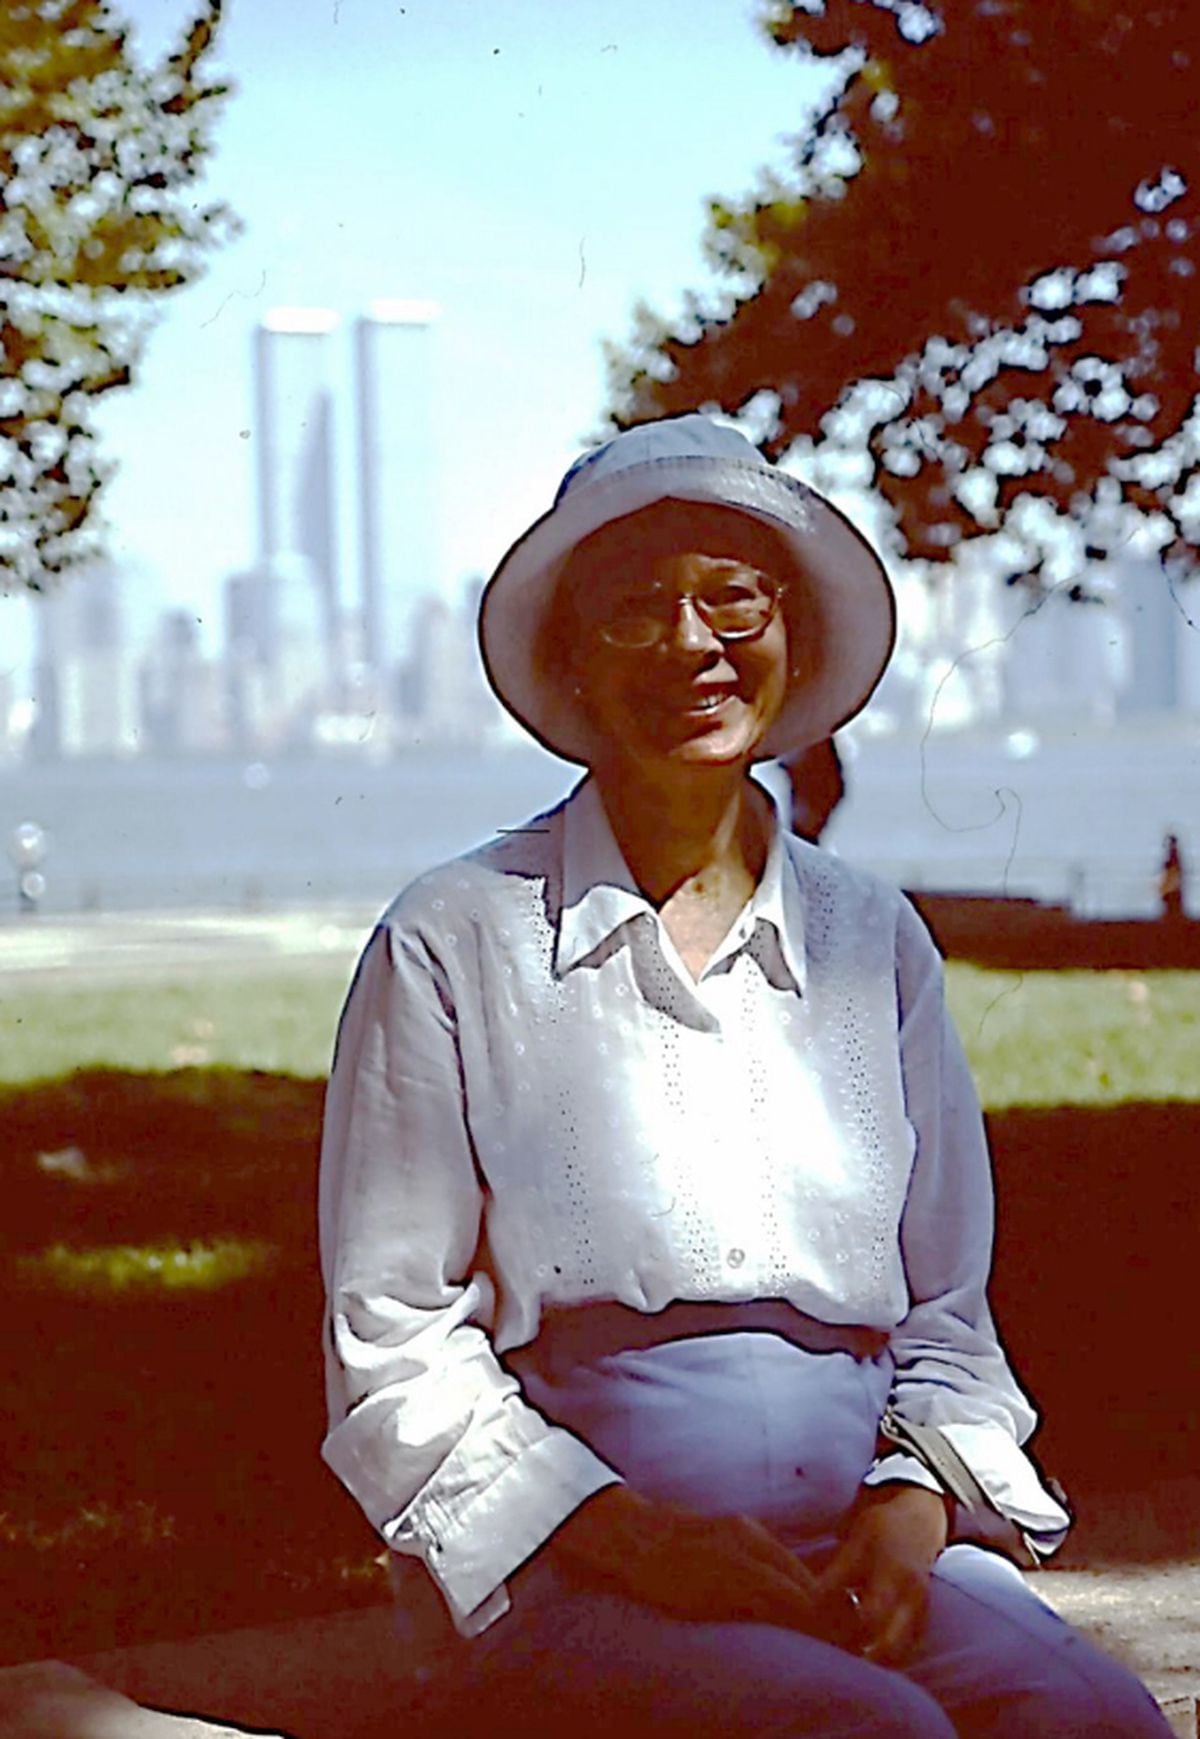 Orleana Cattell of Wolverhampton during her New York trip in September 2001, with the twin towers in the background.